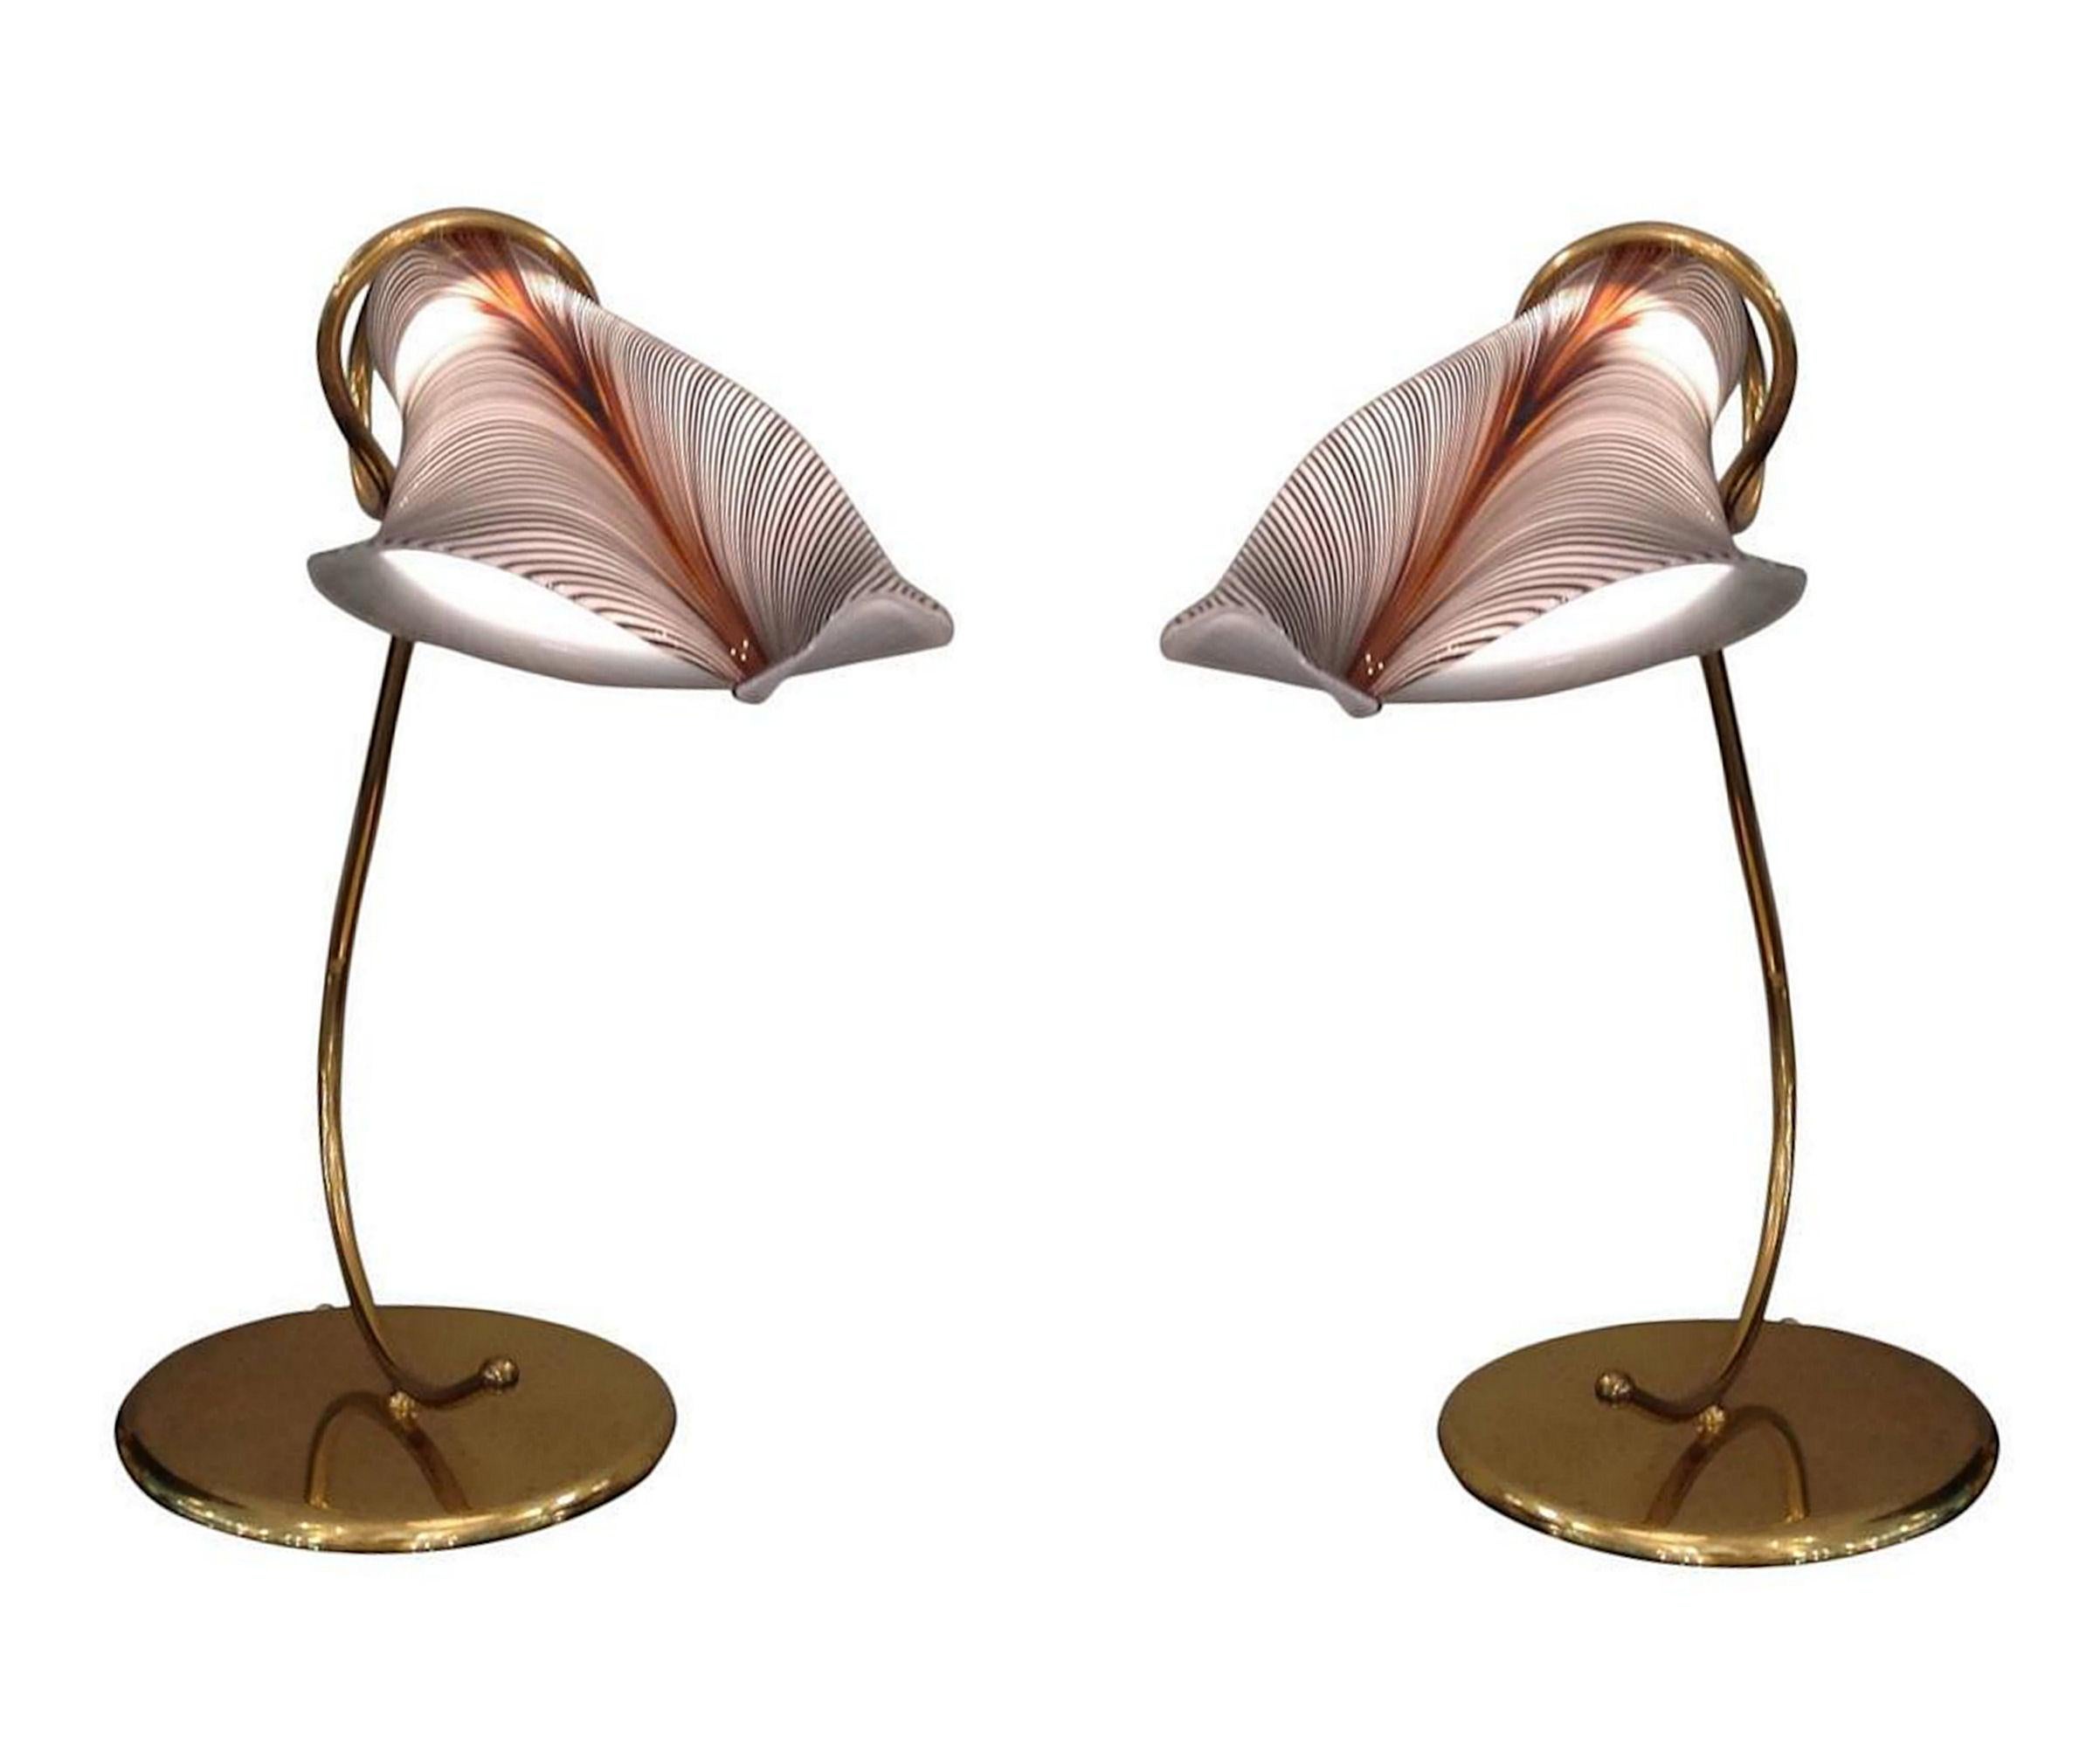 Pair of Mid-Century Modern brass and murano glass shades table lamps, Italy 1960s.
With a handmade murano glass Calla Lily white & brown lines shade, nesting the light, and creating a warm translucent light,
For this pair of vintage Italian